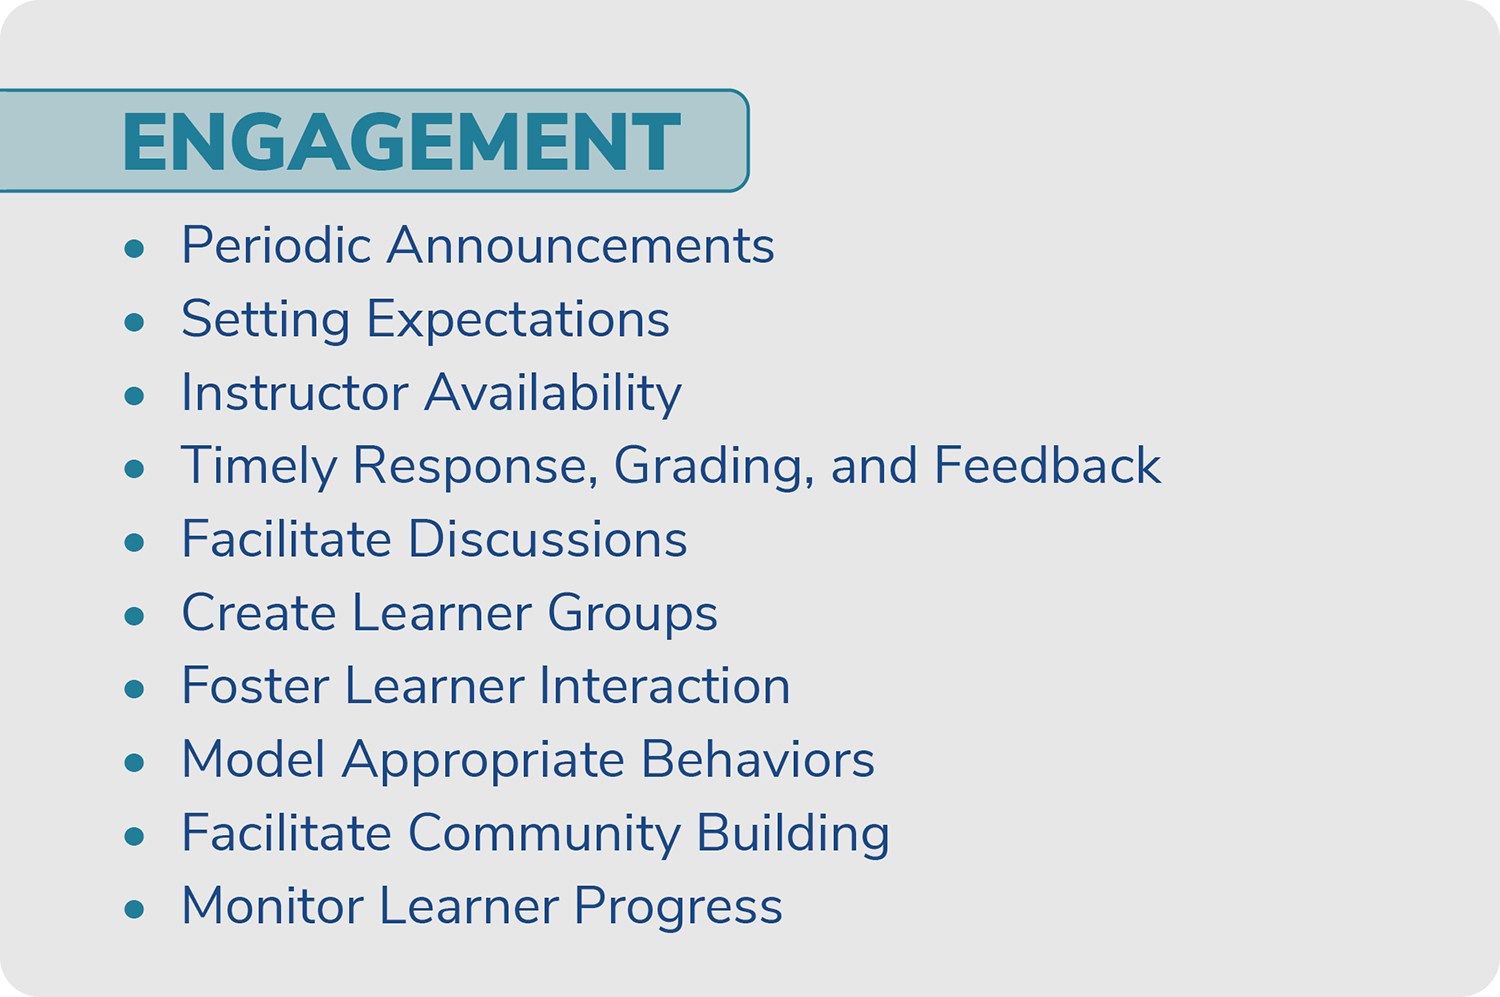 A bulleted list of the ten elements of the 'Engagement' dimension of the IDEAS Framework: Periodic Announcements; Setting Expectations; Instructor Availability; Timely Response, Grading, and Feedback; Facilitate Discussions; Create Learner Groups; Foster Learner Interaction; Model Appropriate Behaviors; Facilitate Community Building; and Monitor Learner Progress.